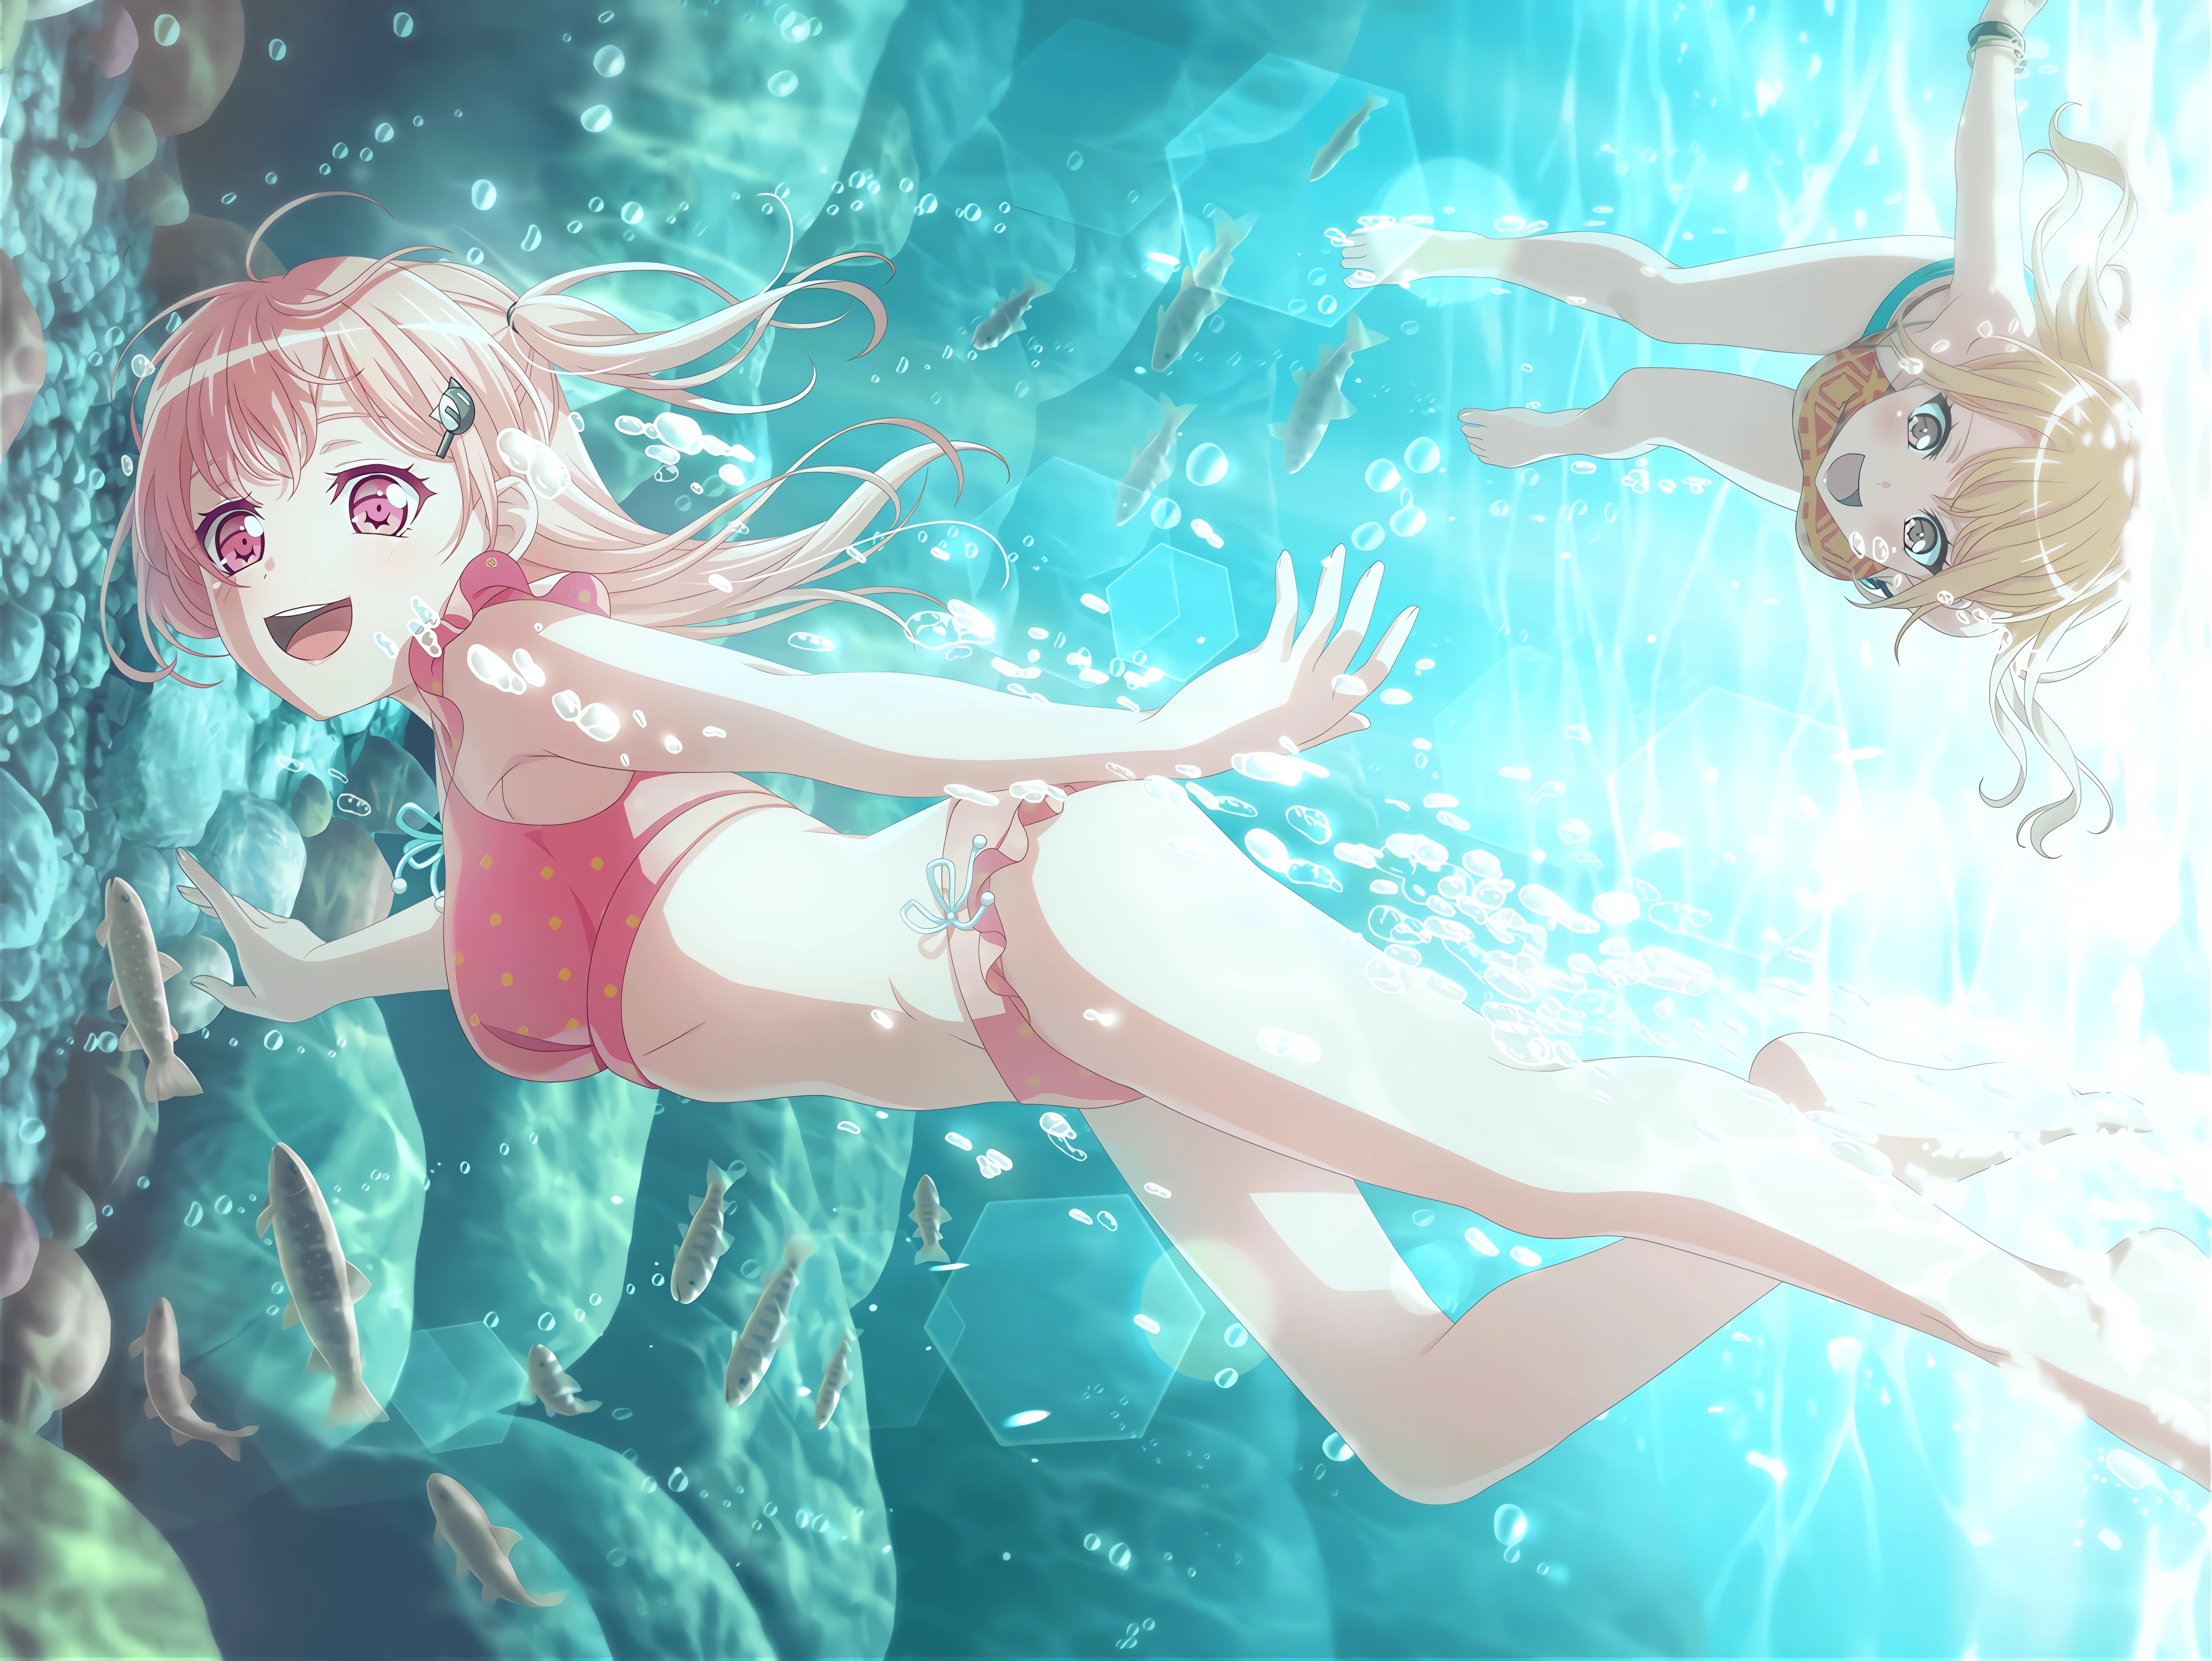 Anime BanG Dream Anime Girls Nanami Hiromachi Bubbles Water In Water Swimming Fish Looking At Viewer 5336x4008